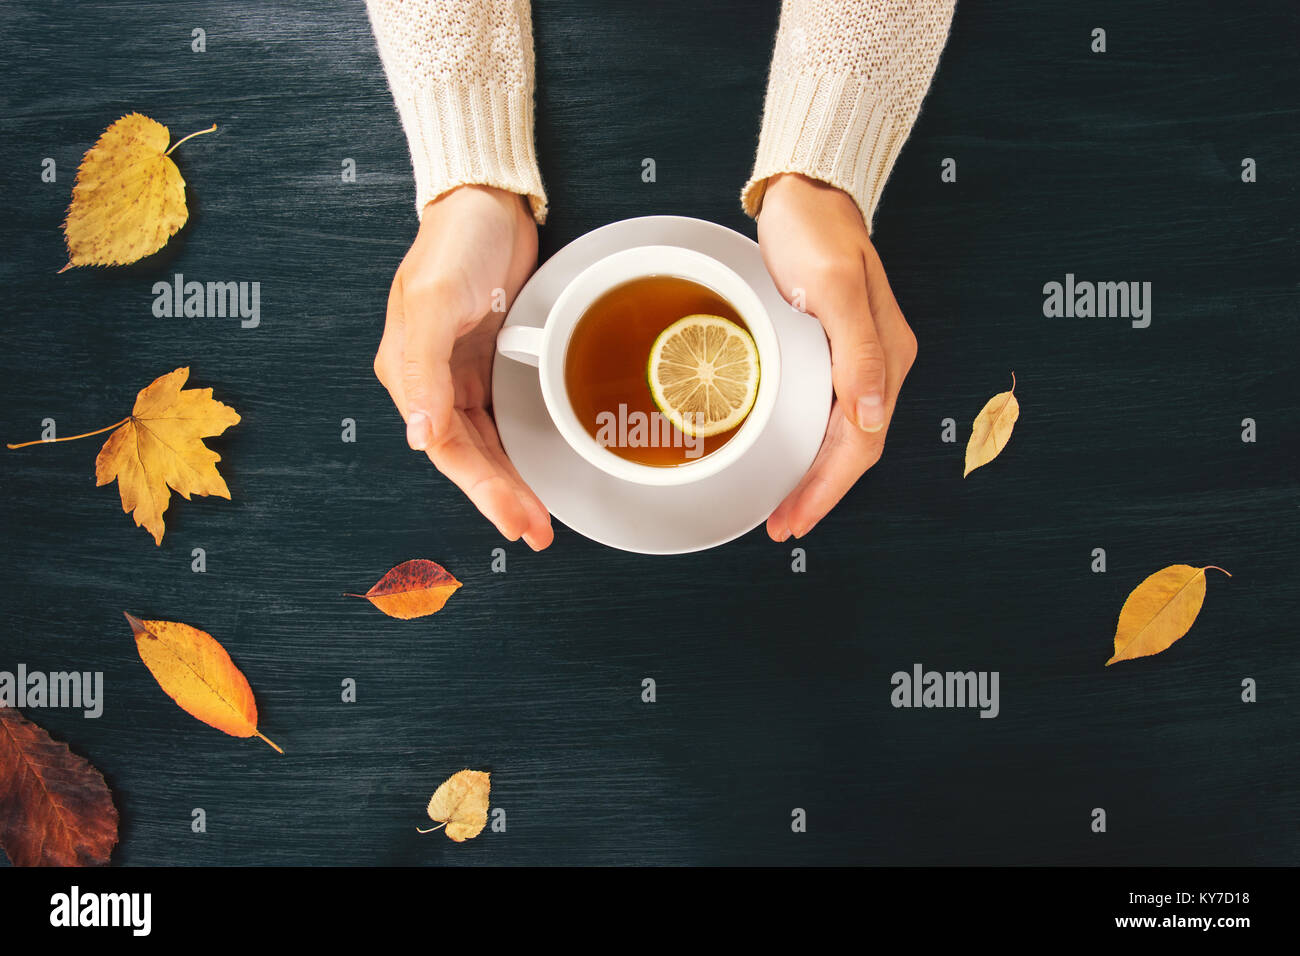 Woman hands holding hot tea lemon cup on wooden table with autumn leaves seasonal concept top view trendy style Stock Photo